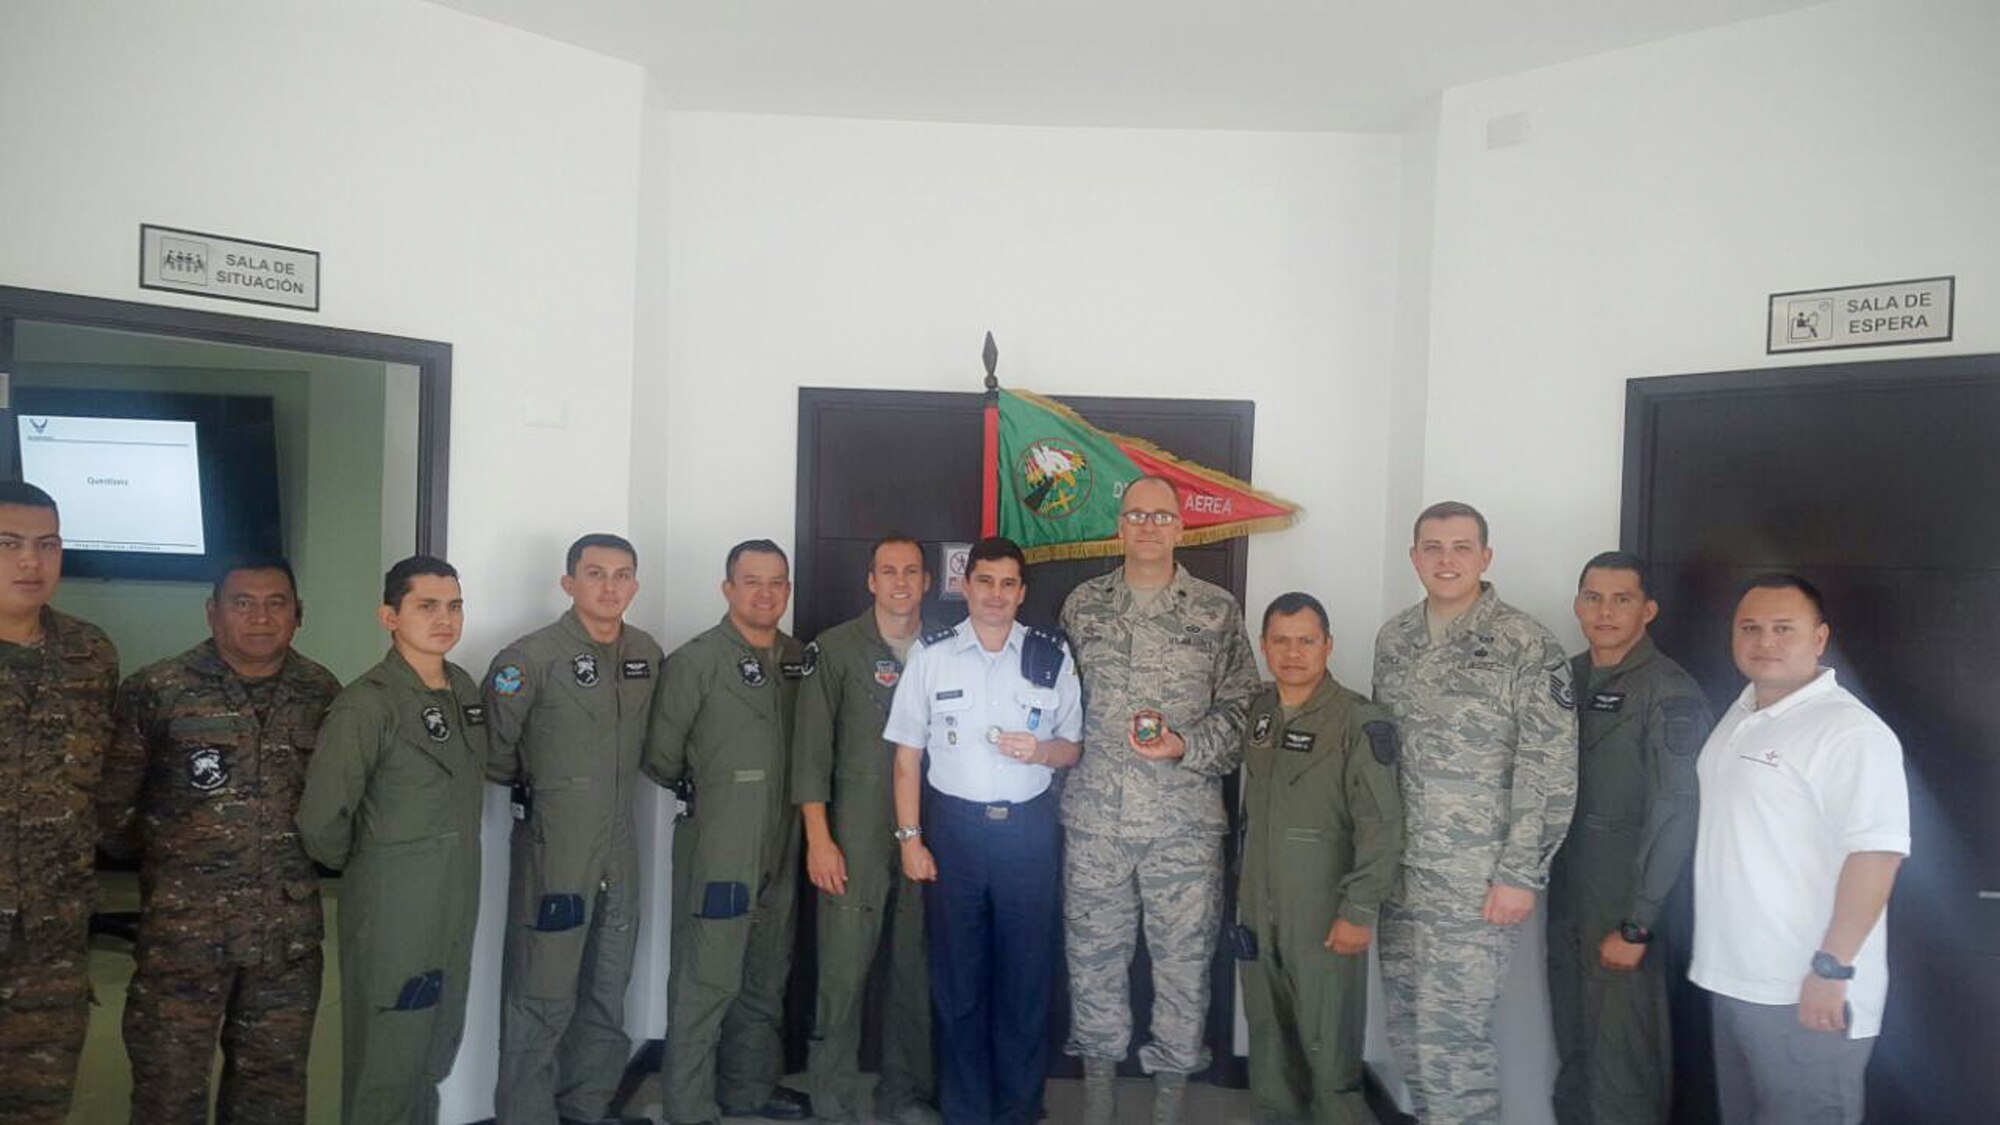 The 225th Air Defense Squadron members exchange unit coins with the Guatemalan Air Force during their State Partnership Program visit to Guatemala Aug. 25, 2017.  The SPP links a state's National Guard with the armed forces of a partner country in a cooperative, mutually beneficial relationship by means of tailored, small footprint, high-impact security cooperation engagements that foster long-term enduring relationships with U.S. friends and allies around the world.  The SPP arose from a 1991 U.S. European Command decision to pair reserve component soldiers and airmen with the armed forces of the then newly formed nations of the Baltic Region following the collapse of the Soviet Bloc.